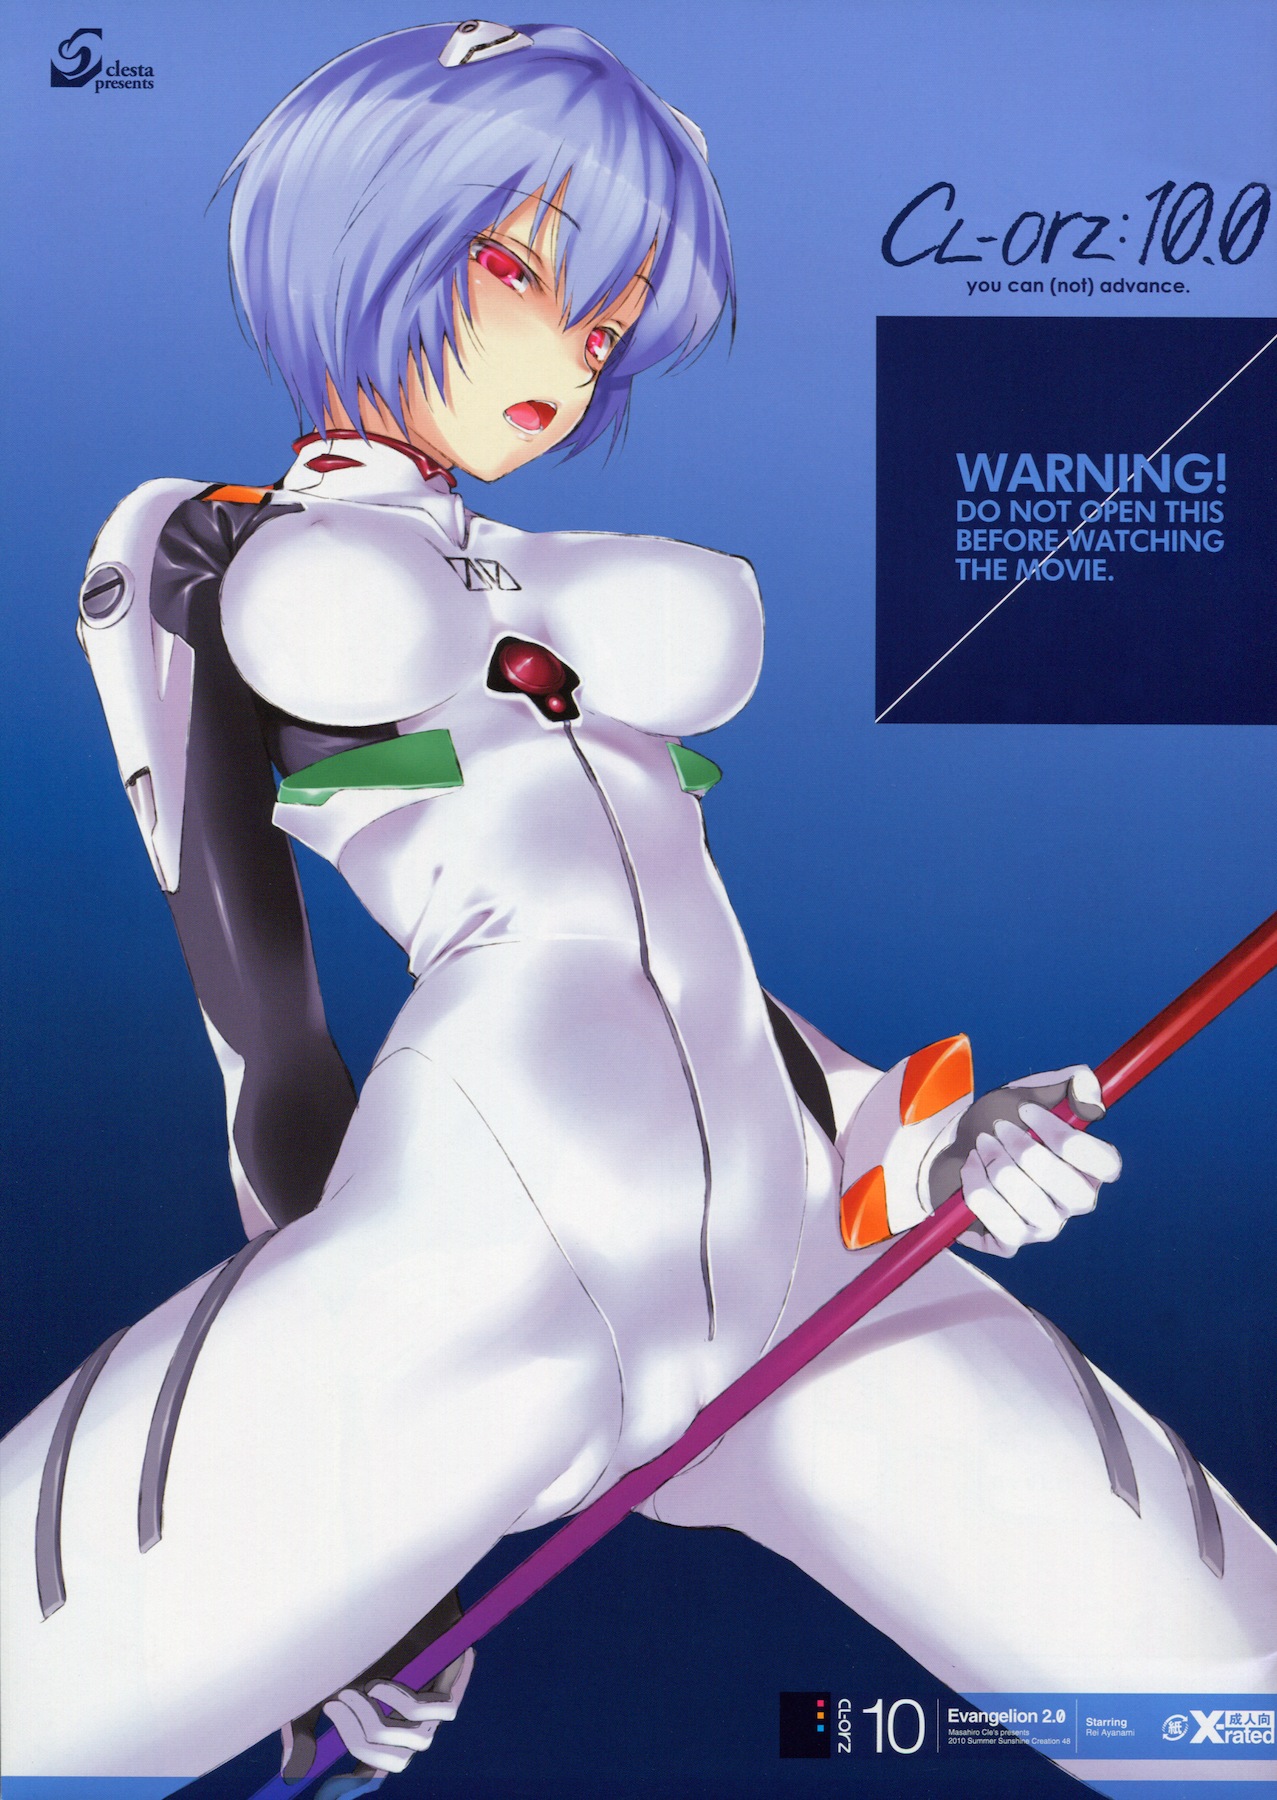 SC48 Clesta Cle Masahiro CL orz 10.0 you can not advance Rebuild of Evangelion 00